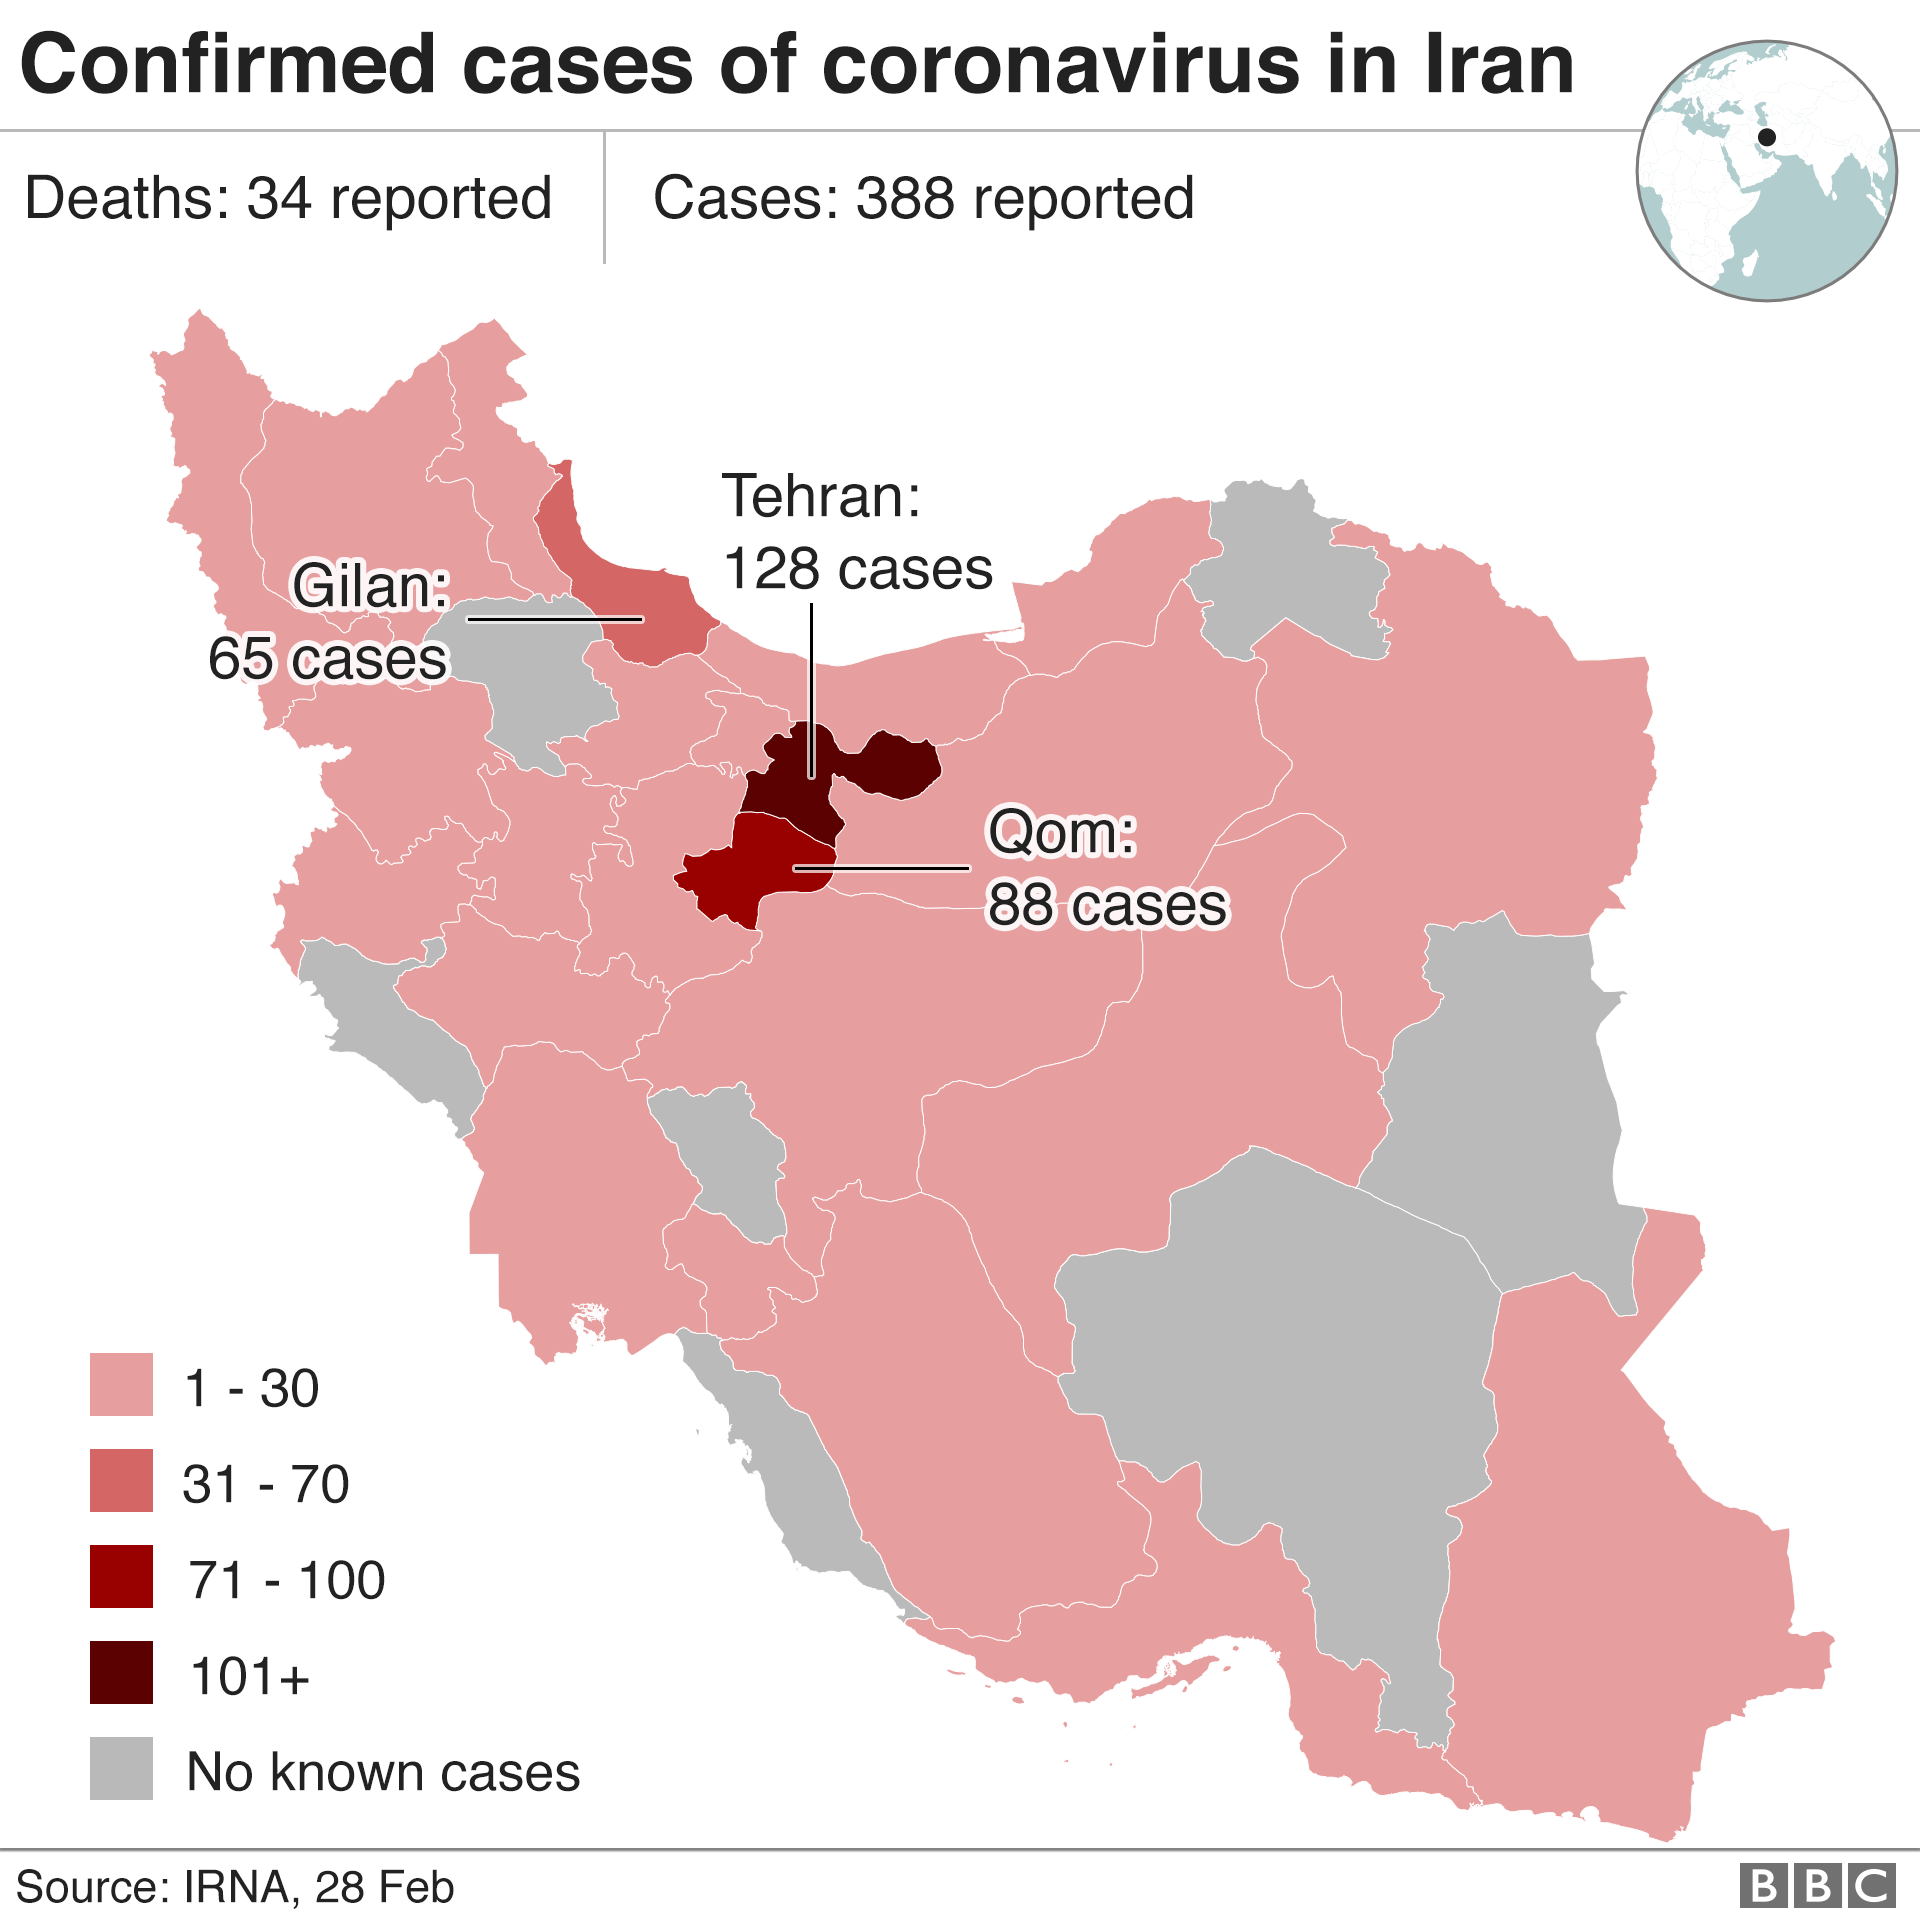 Map showing number of confirmed Covid-19 cases in Iran (28 February 2020)